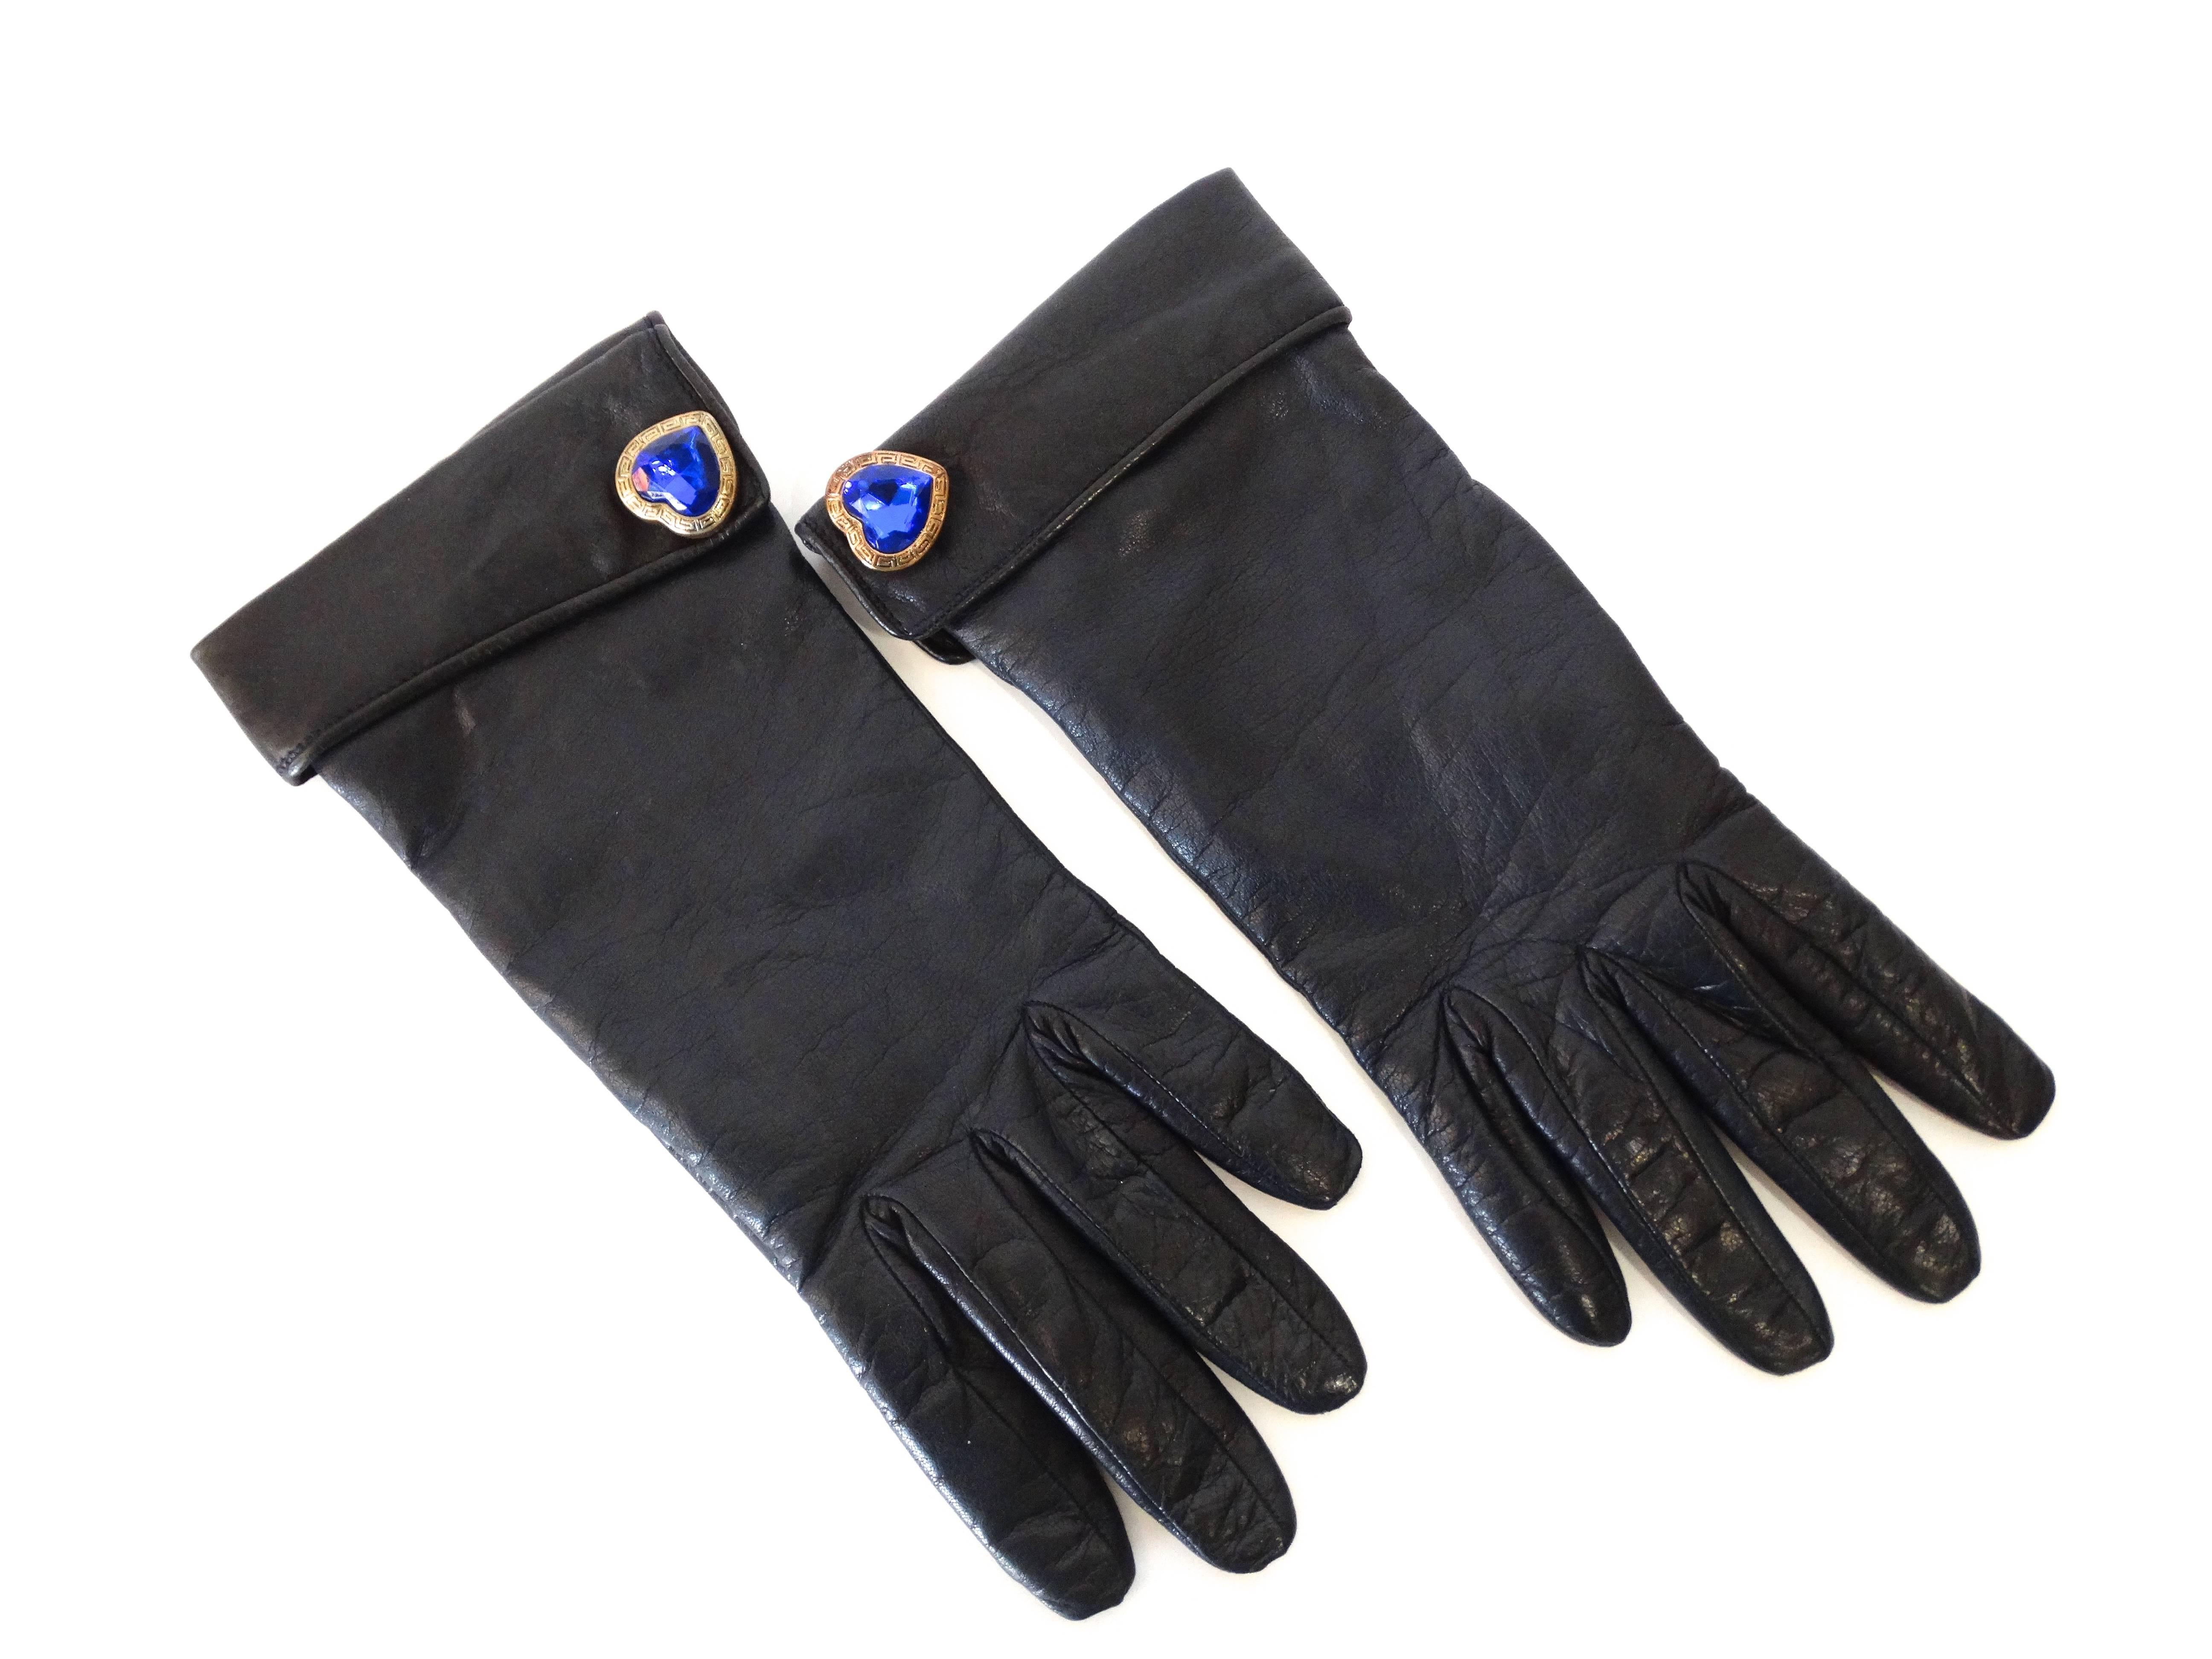 1990s Navy Leather Moschino Gloves. Fully lined with tan knit wool. Blue jewel heart buttons on the cuffs. Marked a size 7 label inside the glove Made in Italy 